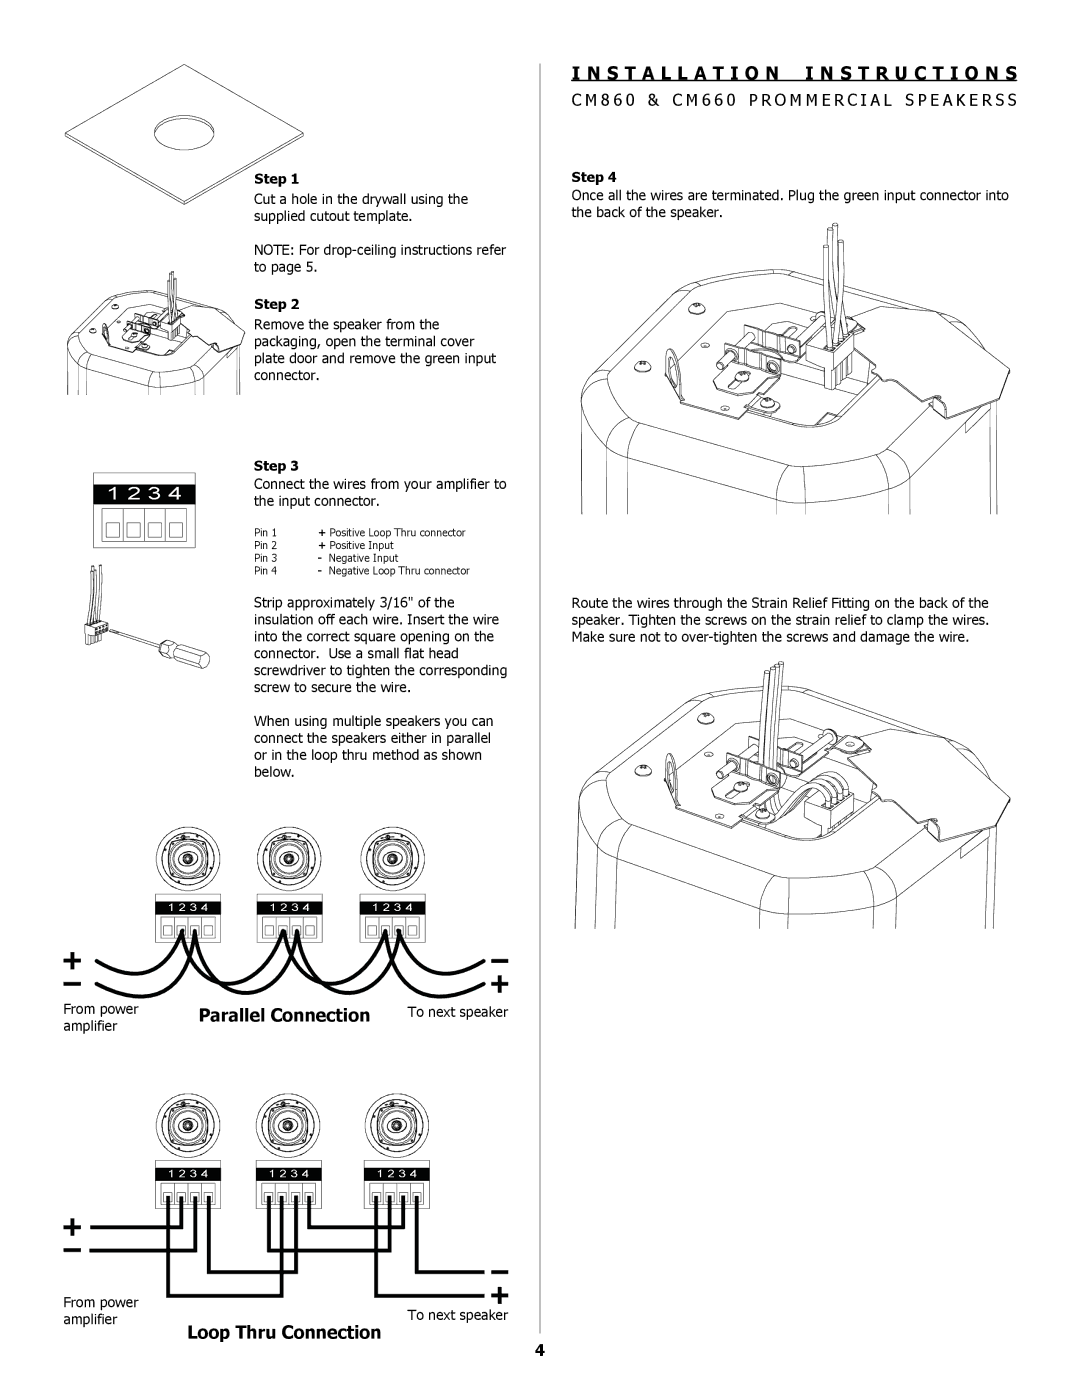 Southwestern Bell CM860, CM660 installation instructions Parallel Connection, Loop Thru Connection 